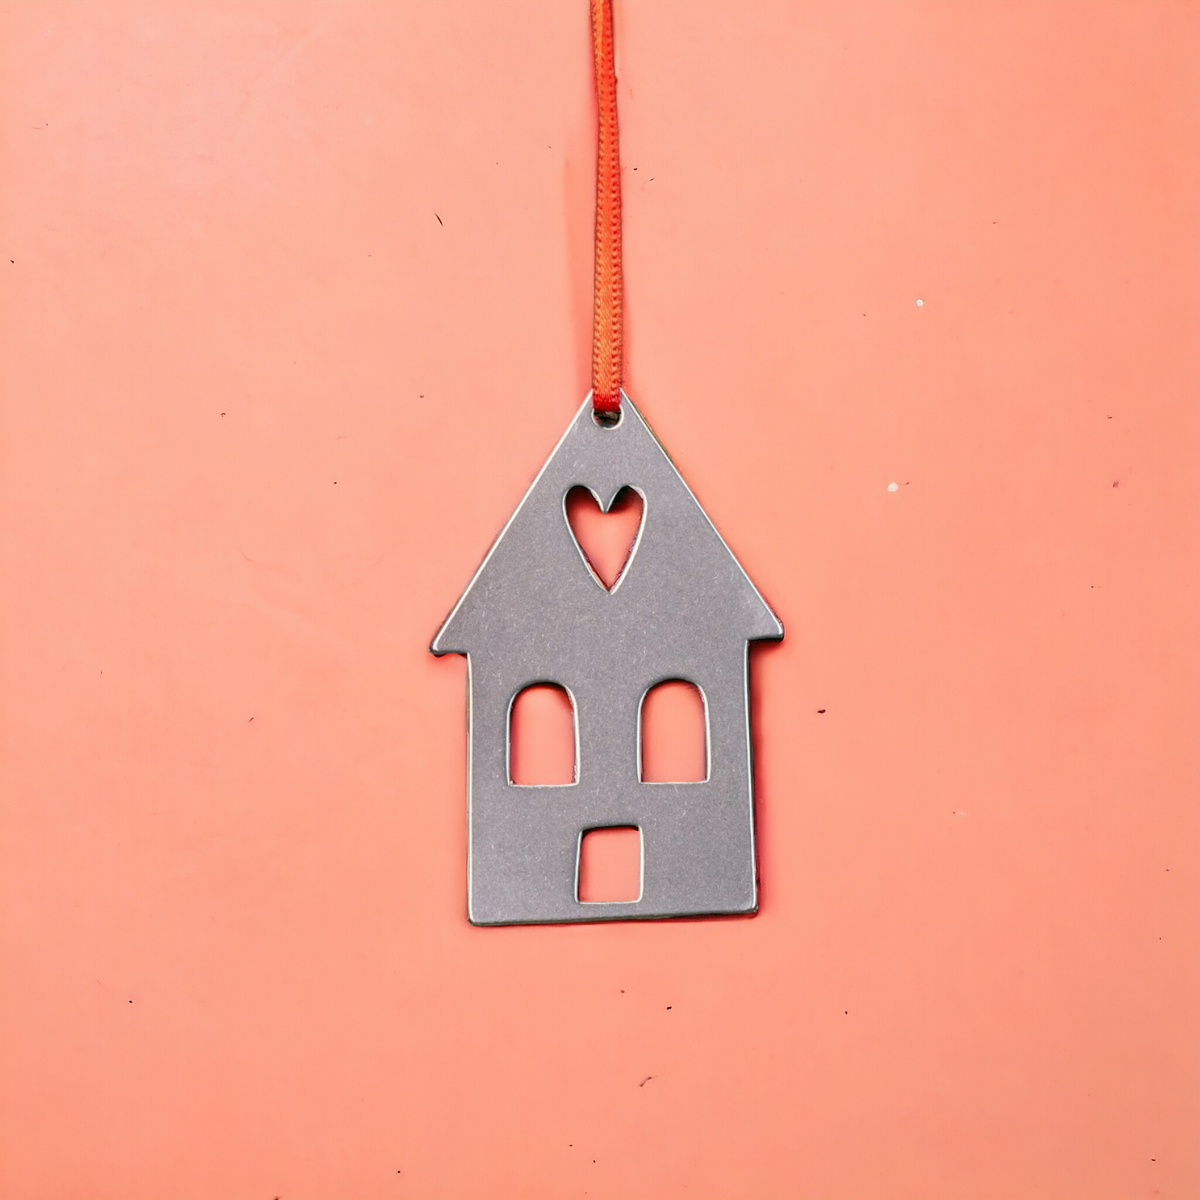 Pivot House Stainless Steel Christmas Decoration -  Exclusive to Crisis